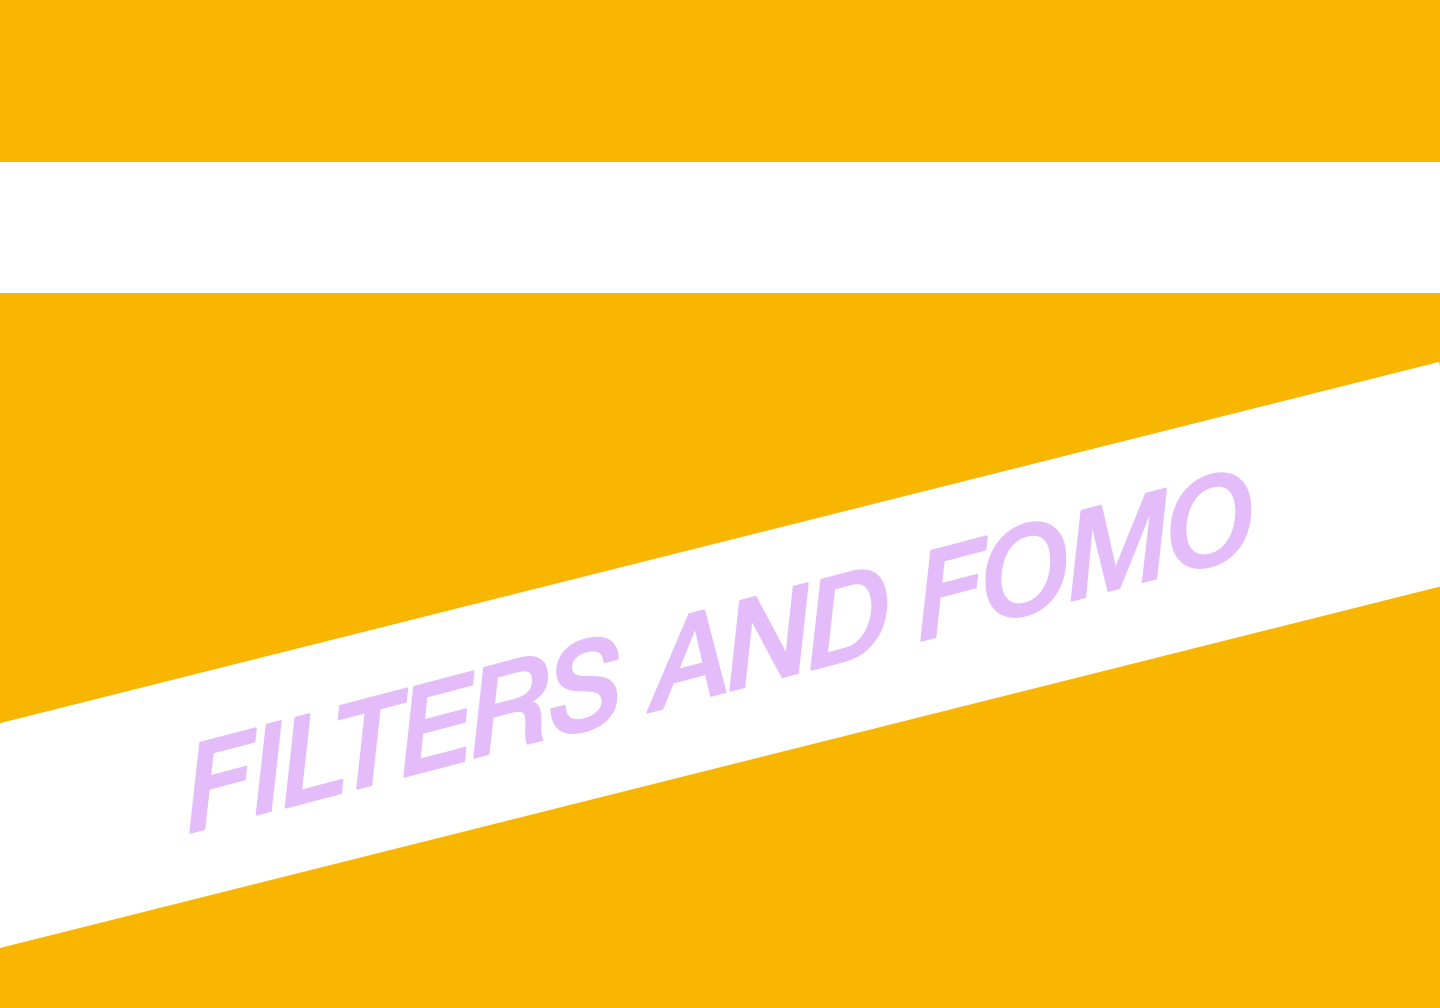 IDENTITY // Filters and FOMO: How Real is your Online Identity?